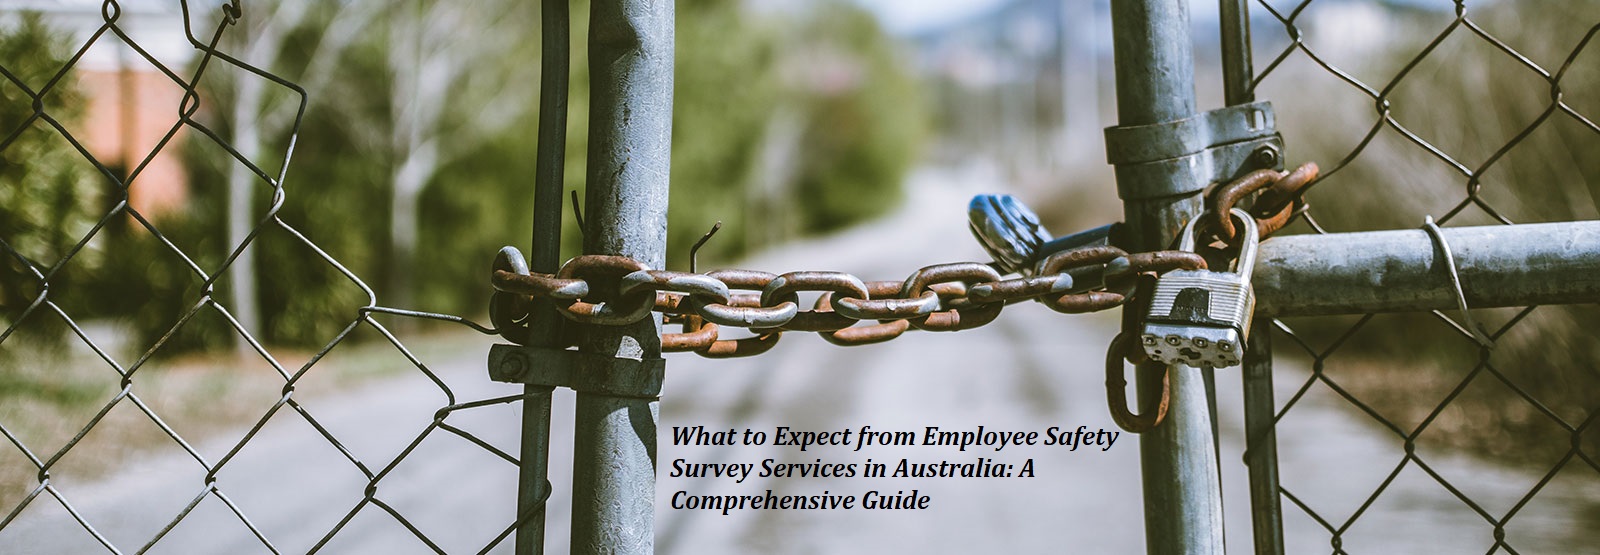 What to Expect from Employee Safety Survey Services in Australia: A Comprehensive Guide